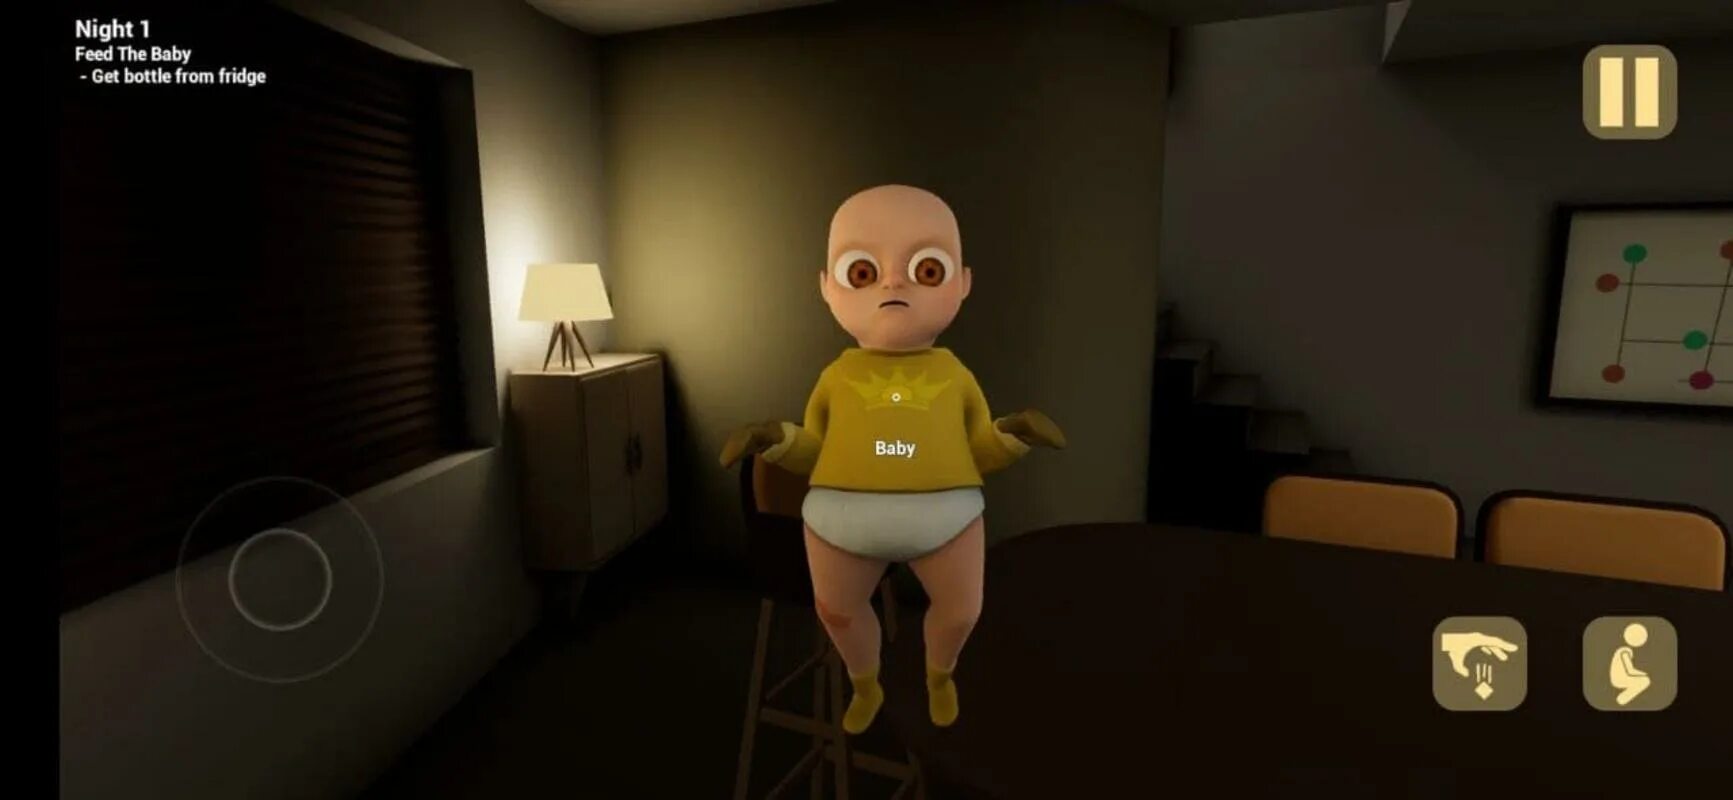 The Baby in Yellow 3 игра. Малыш в жёлтом игра. Моды на Baby in Yellow. Малыш в желтом игра 1.5.0. Игра желтый малыш лаборатория